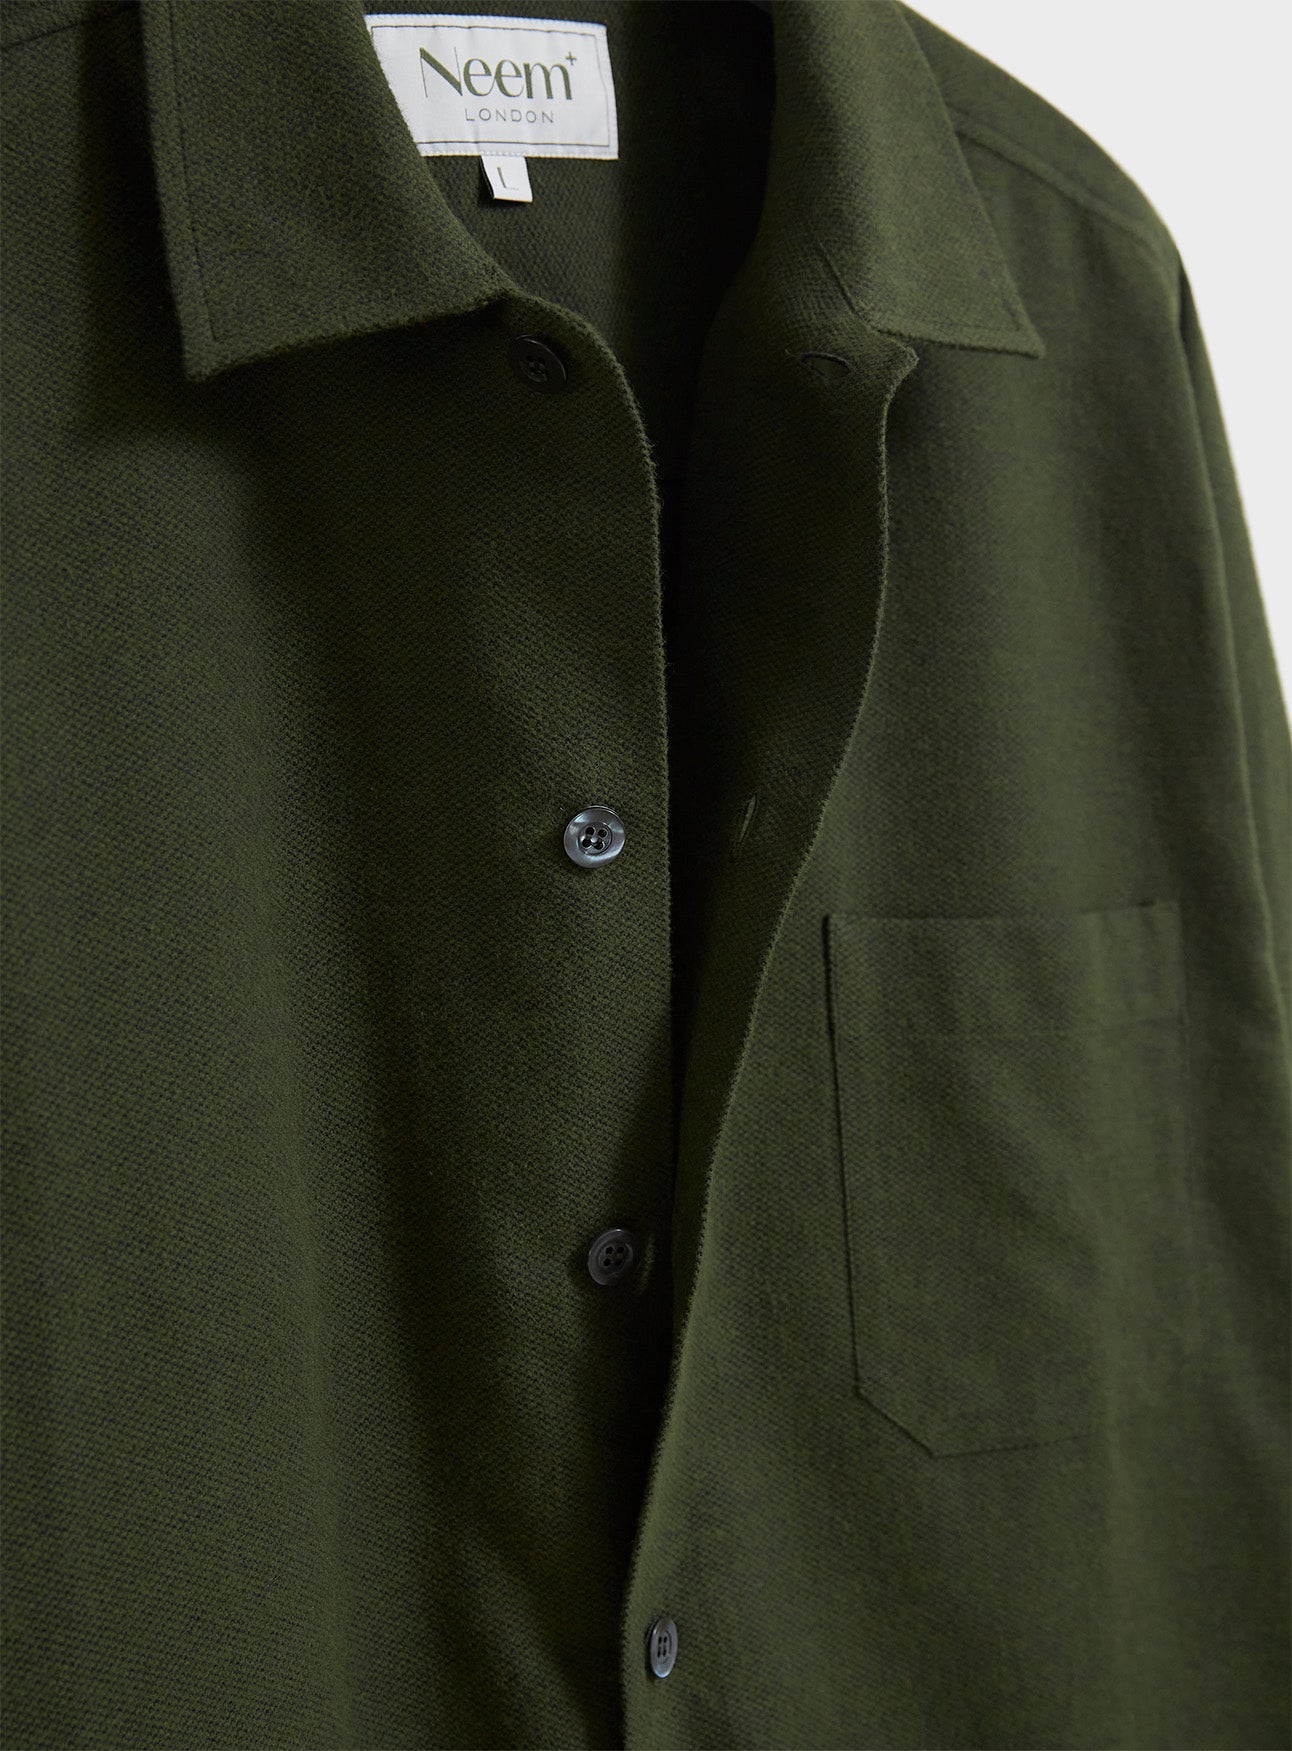 green overshirt recycled clothing